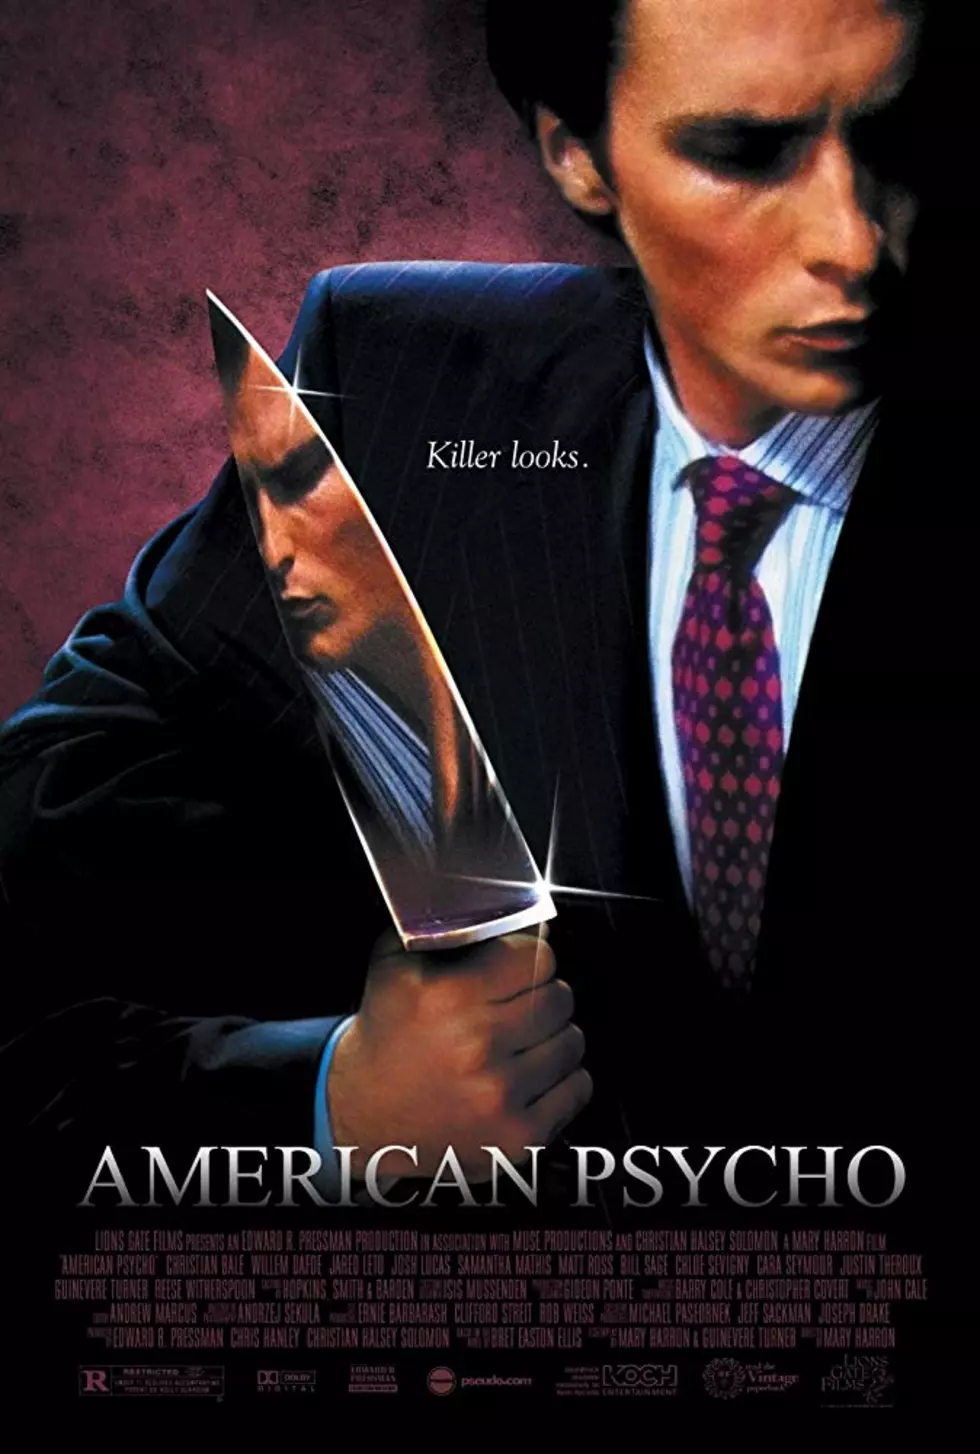 Lubbock’s Alamo Drafthouse to Hold Movie Party Version of ‘American Psycho’